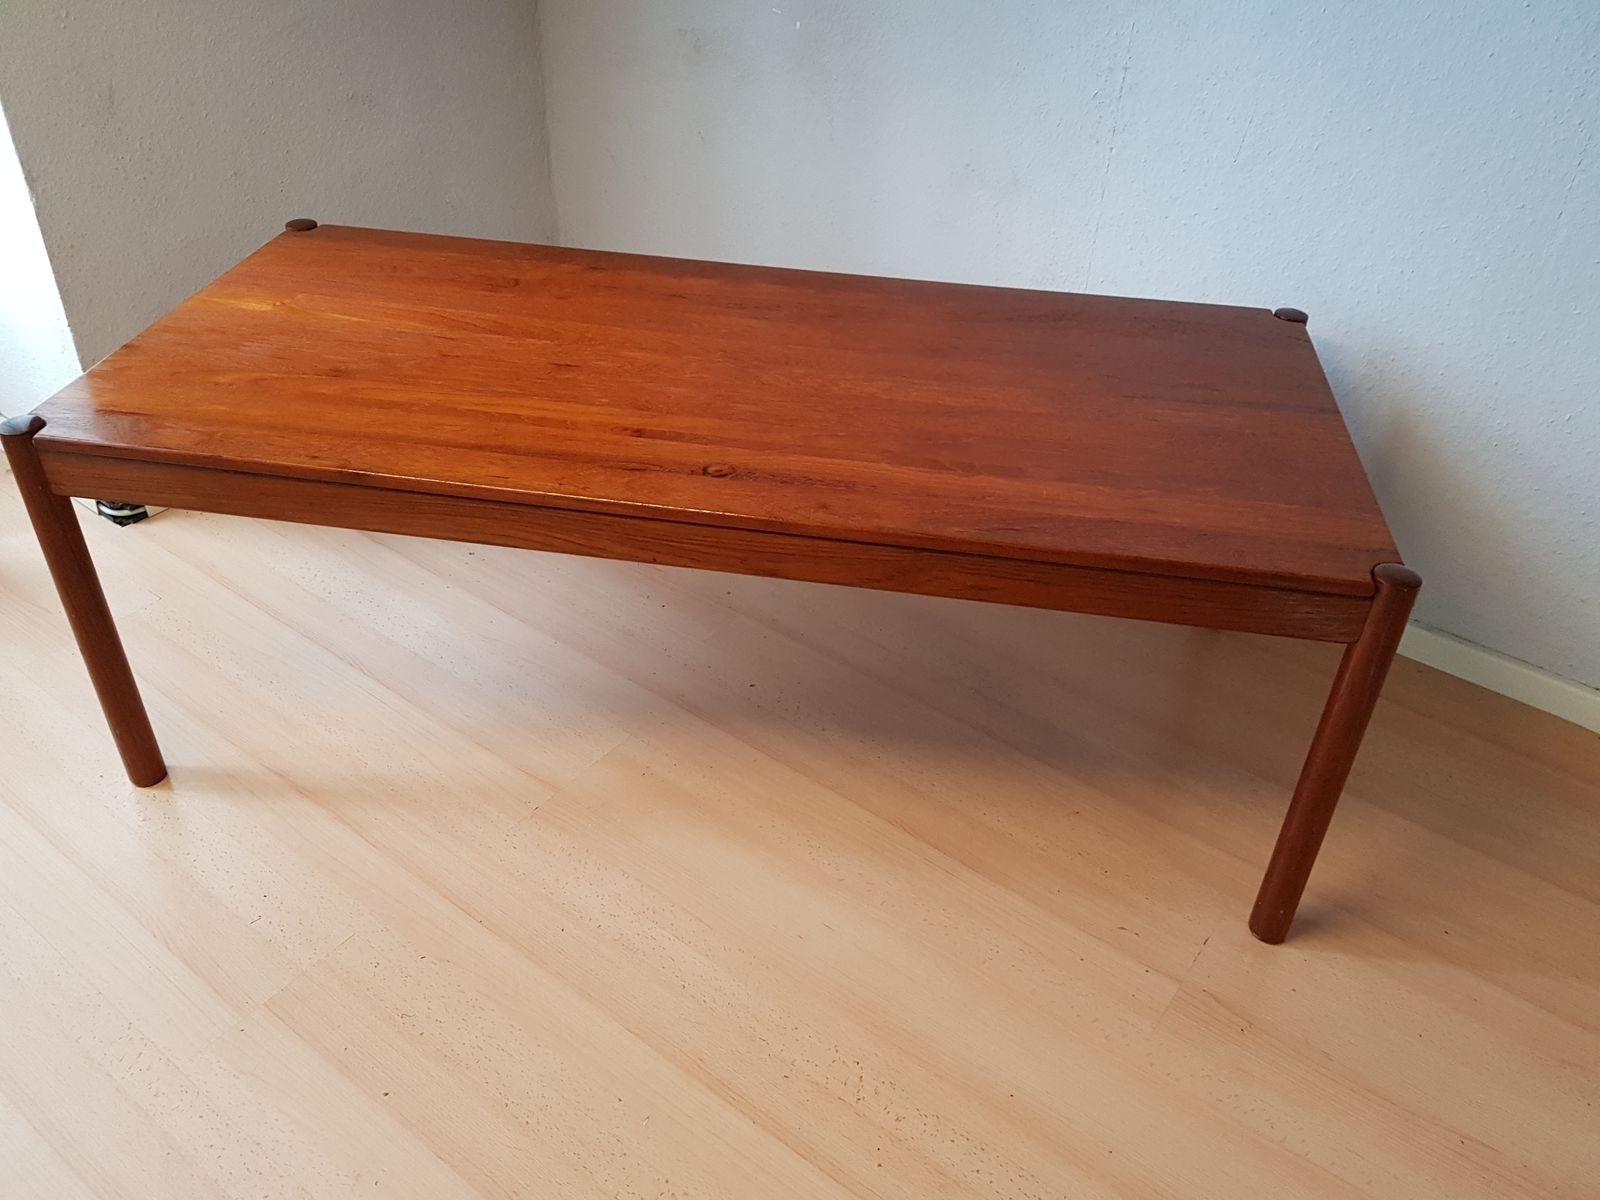 Newest Large Teak Coffee Tables In Large Teak Coffee Tablemagnus Olesen For Sale At Pamono (Gallery 2 of 20)